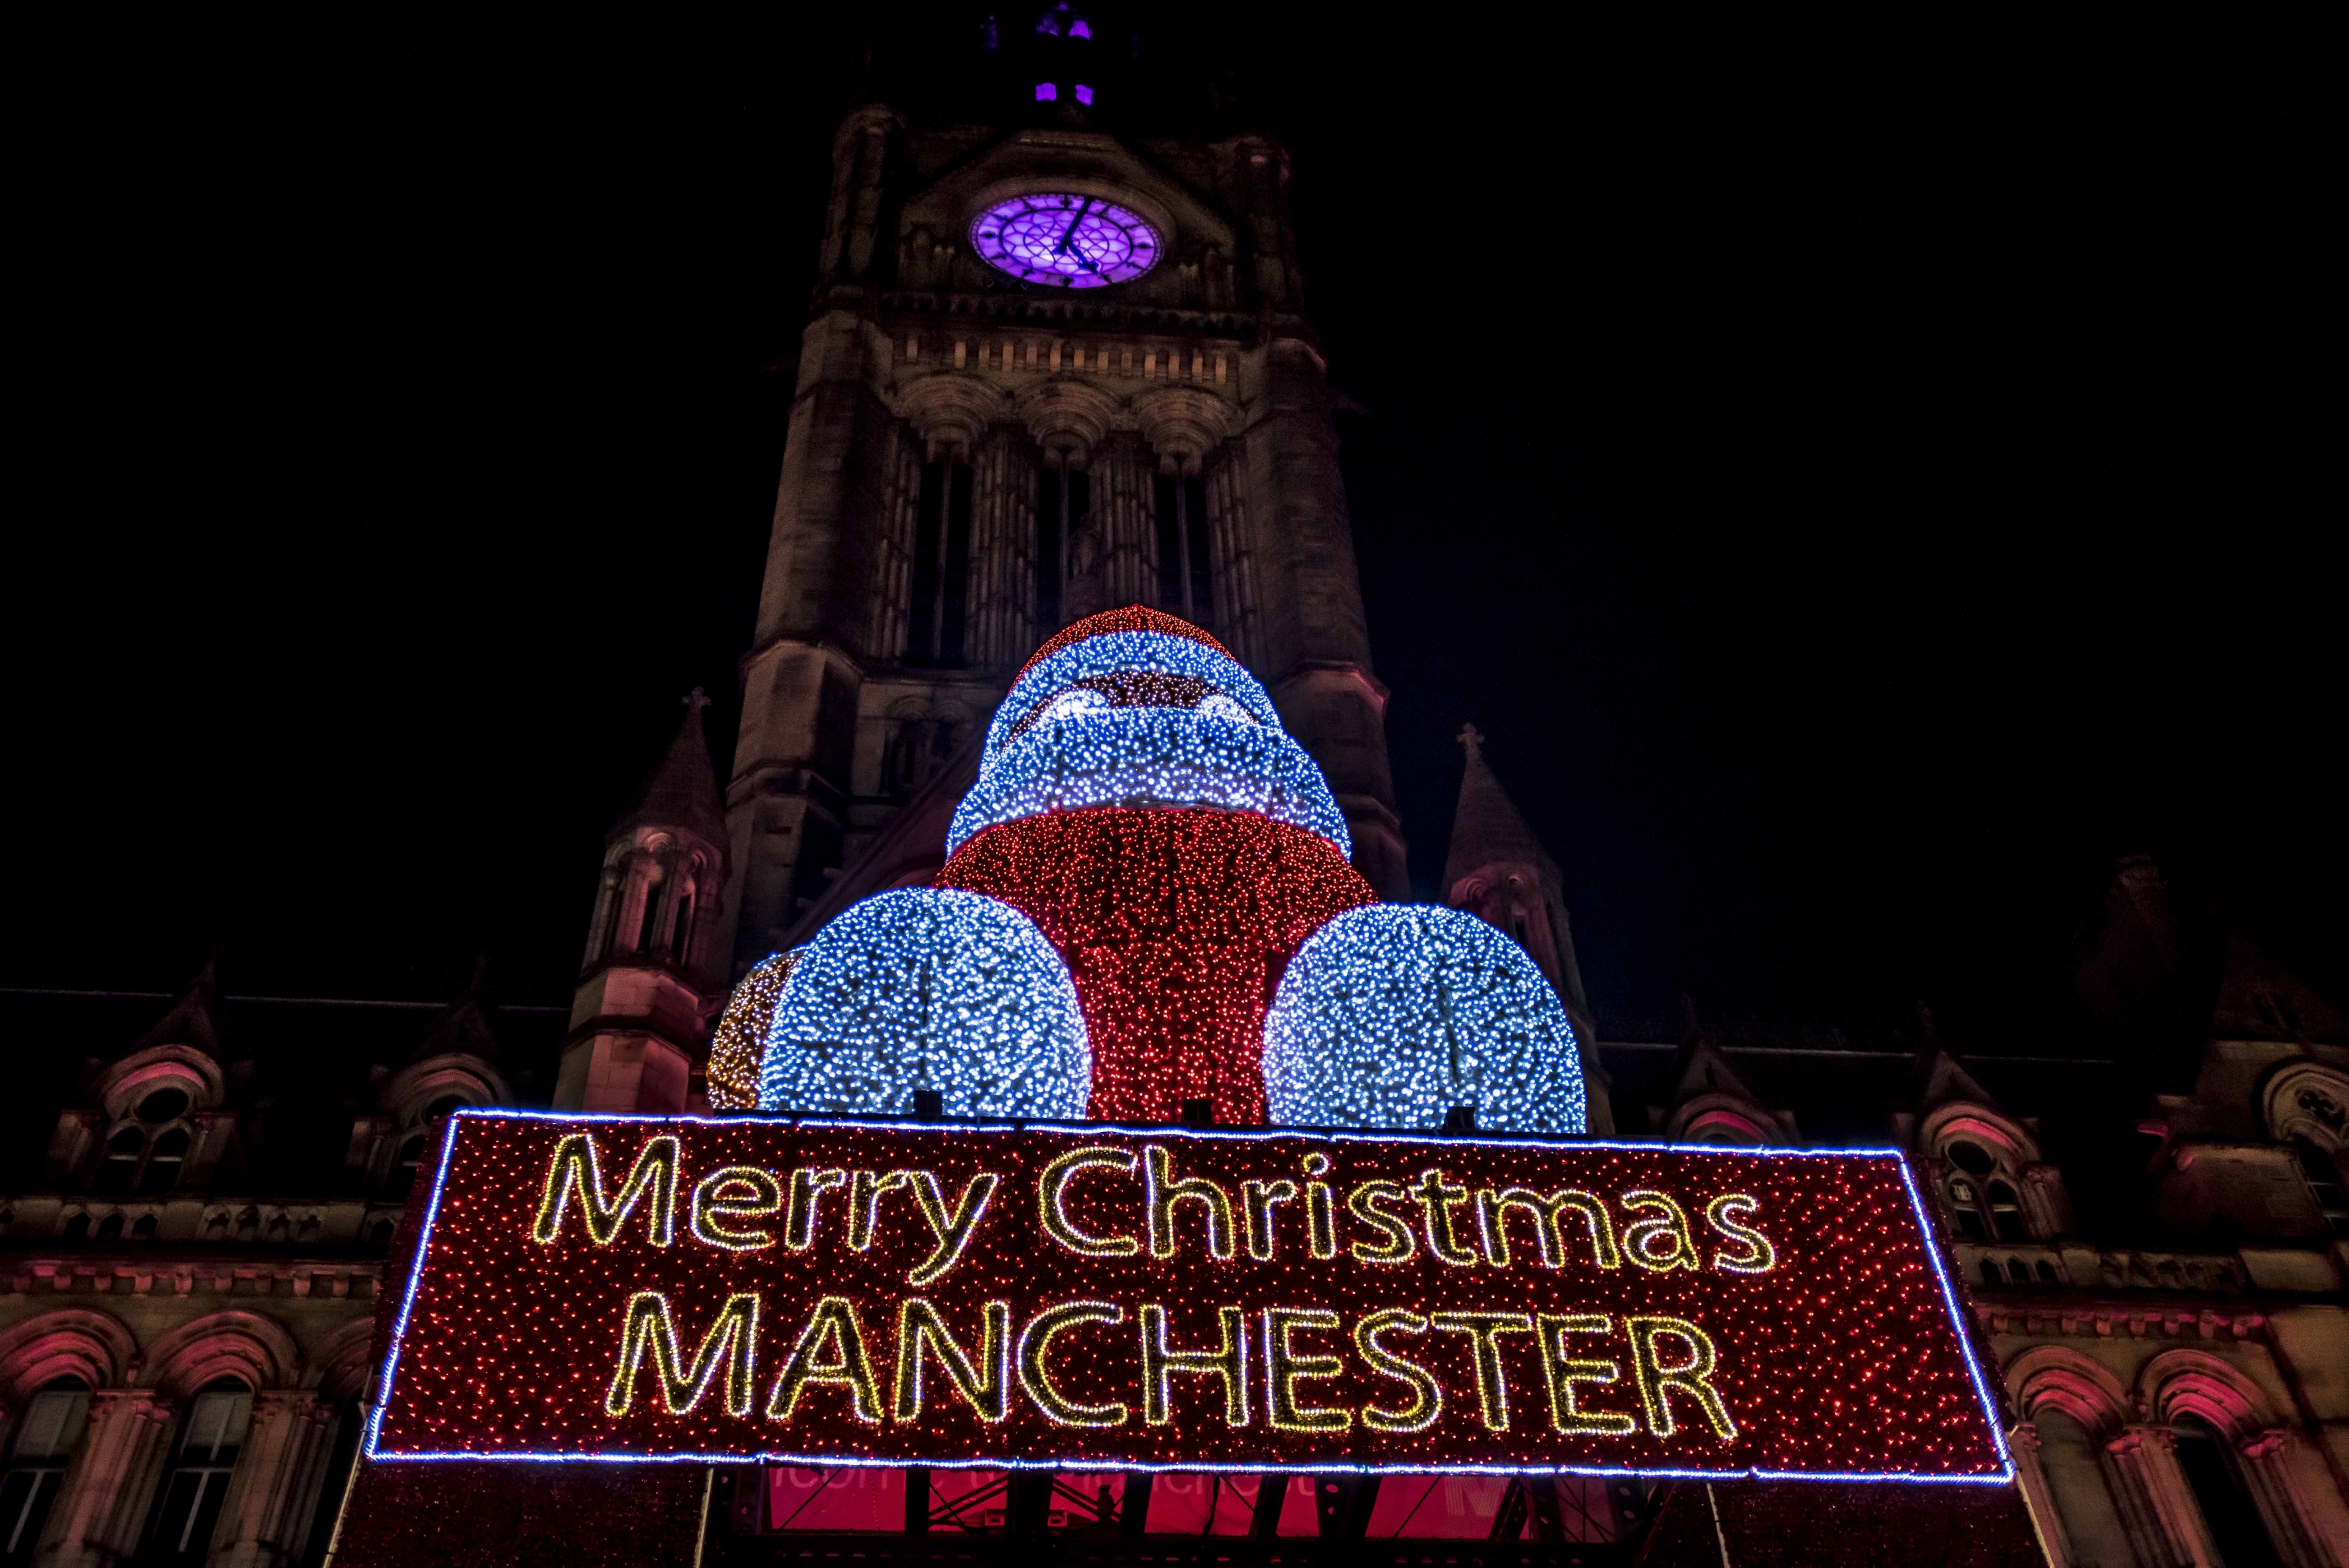 Manchester Christmas Market, image by Chris Payne